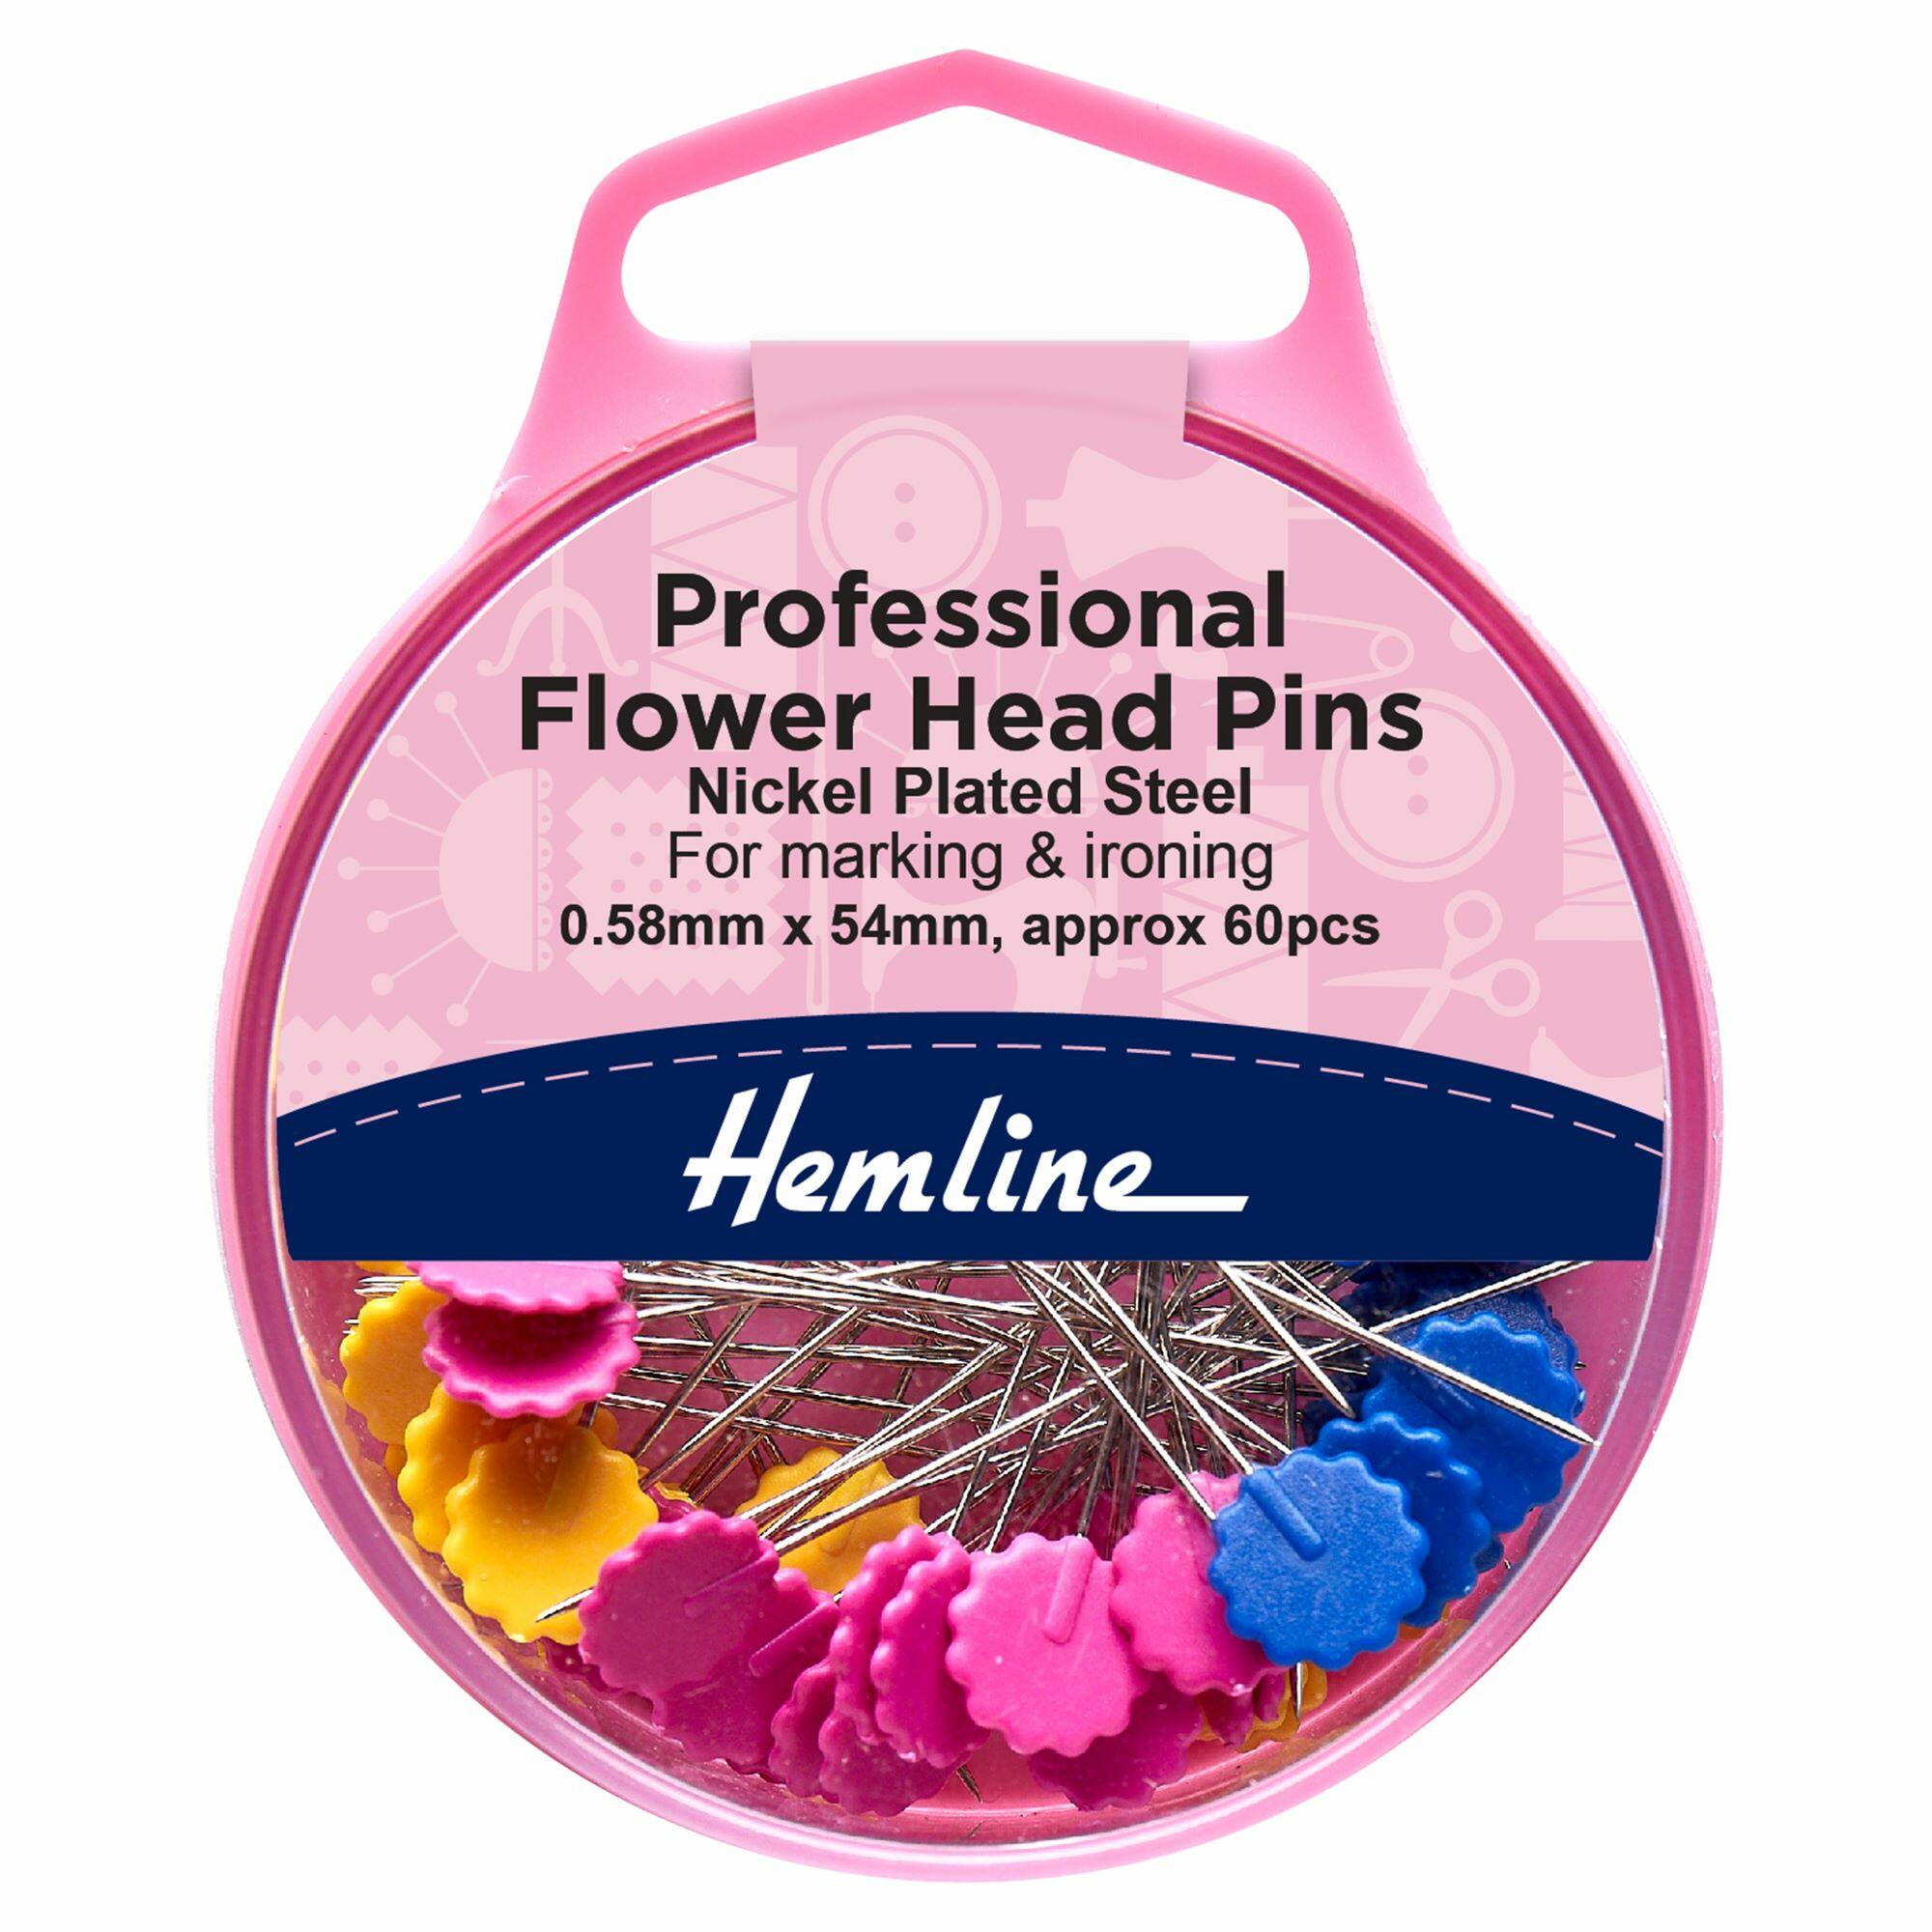 Pink Hemline plastic storage pot containing pins with colourful flat plastic flower shaped heads.